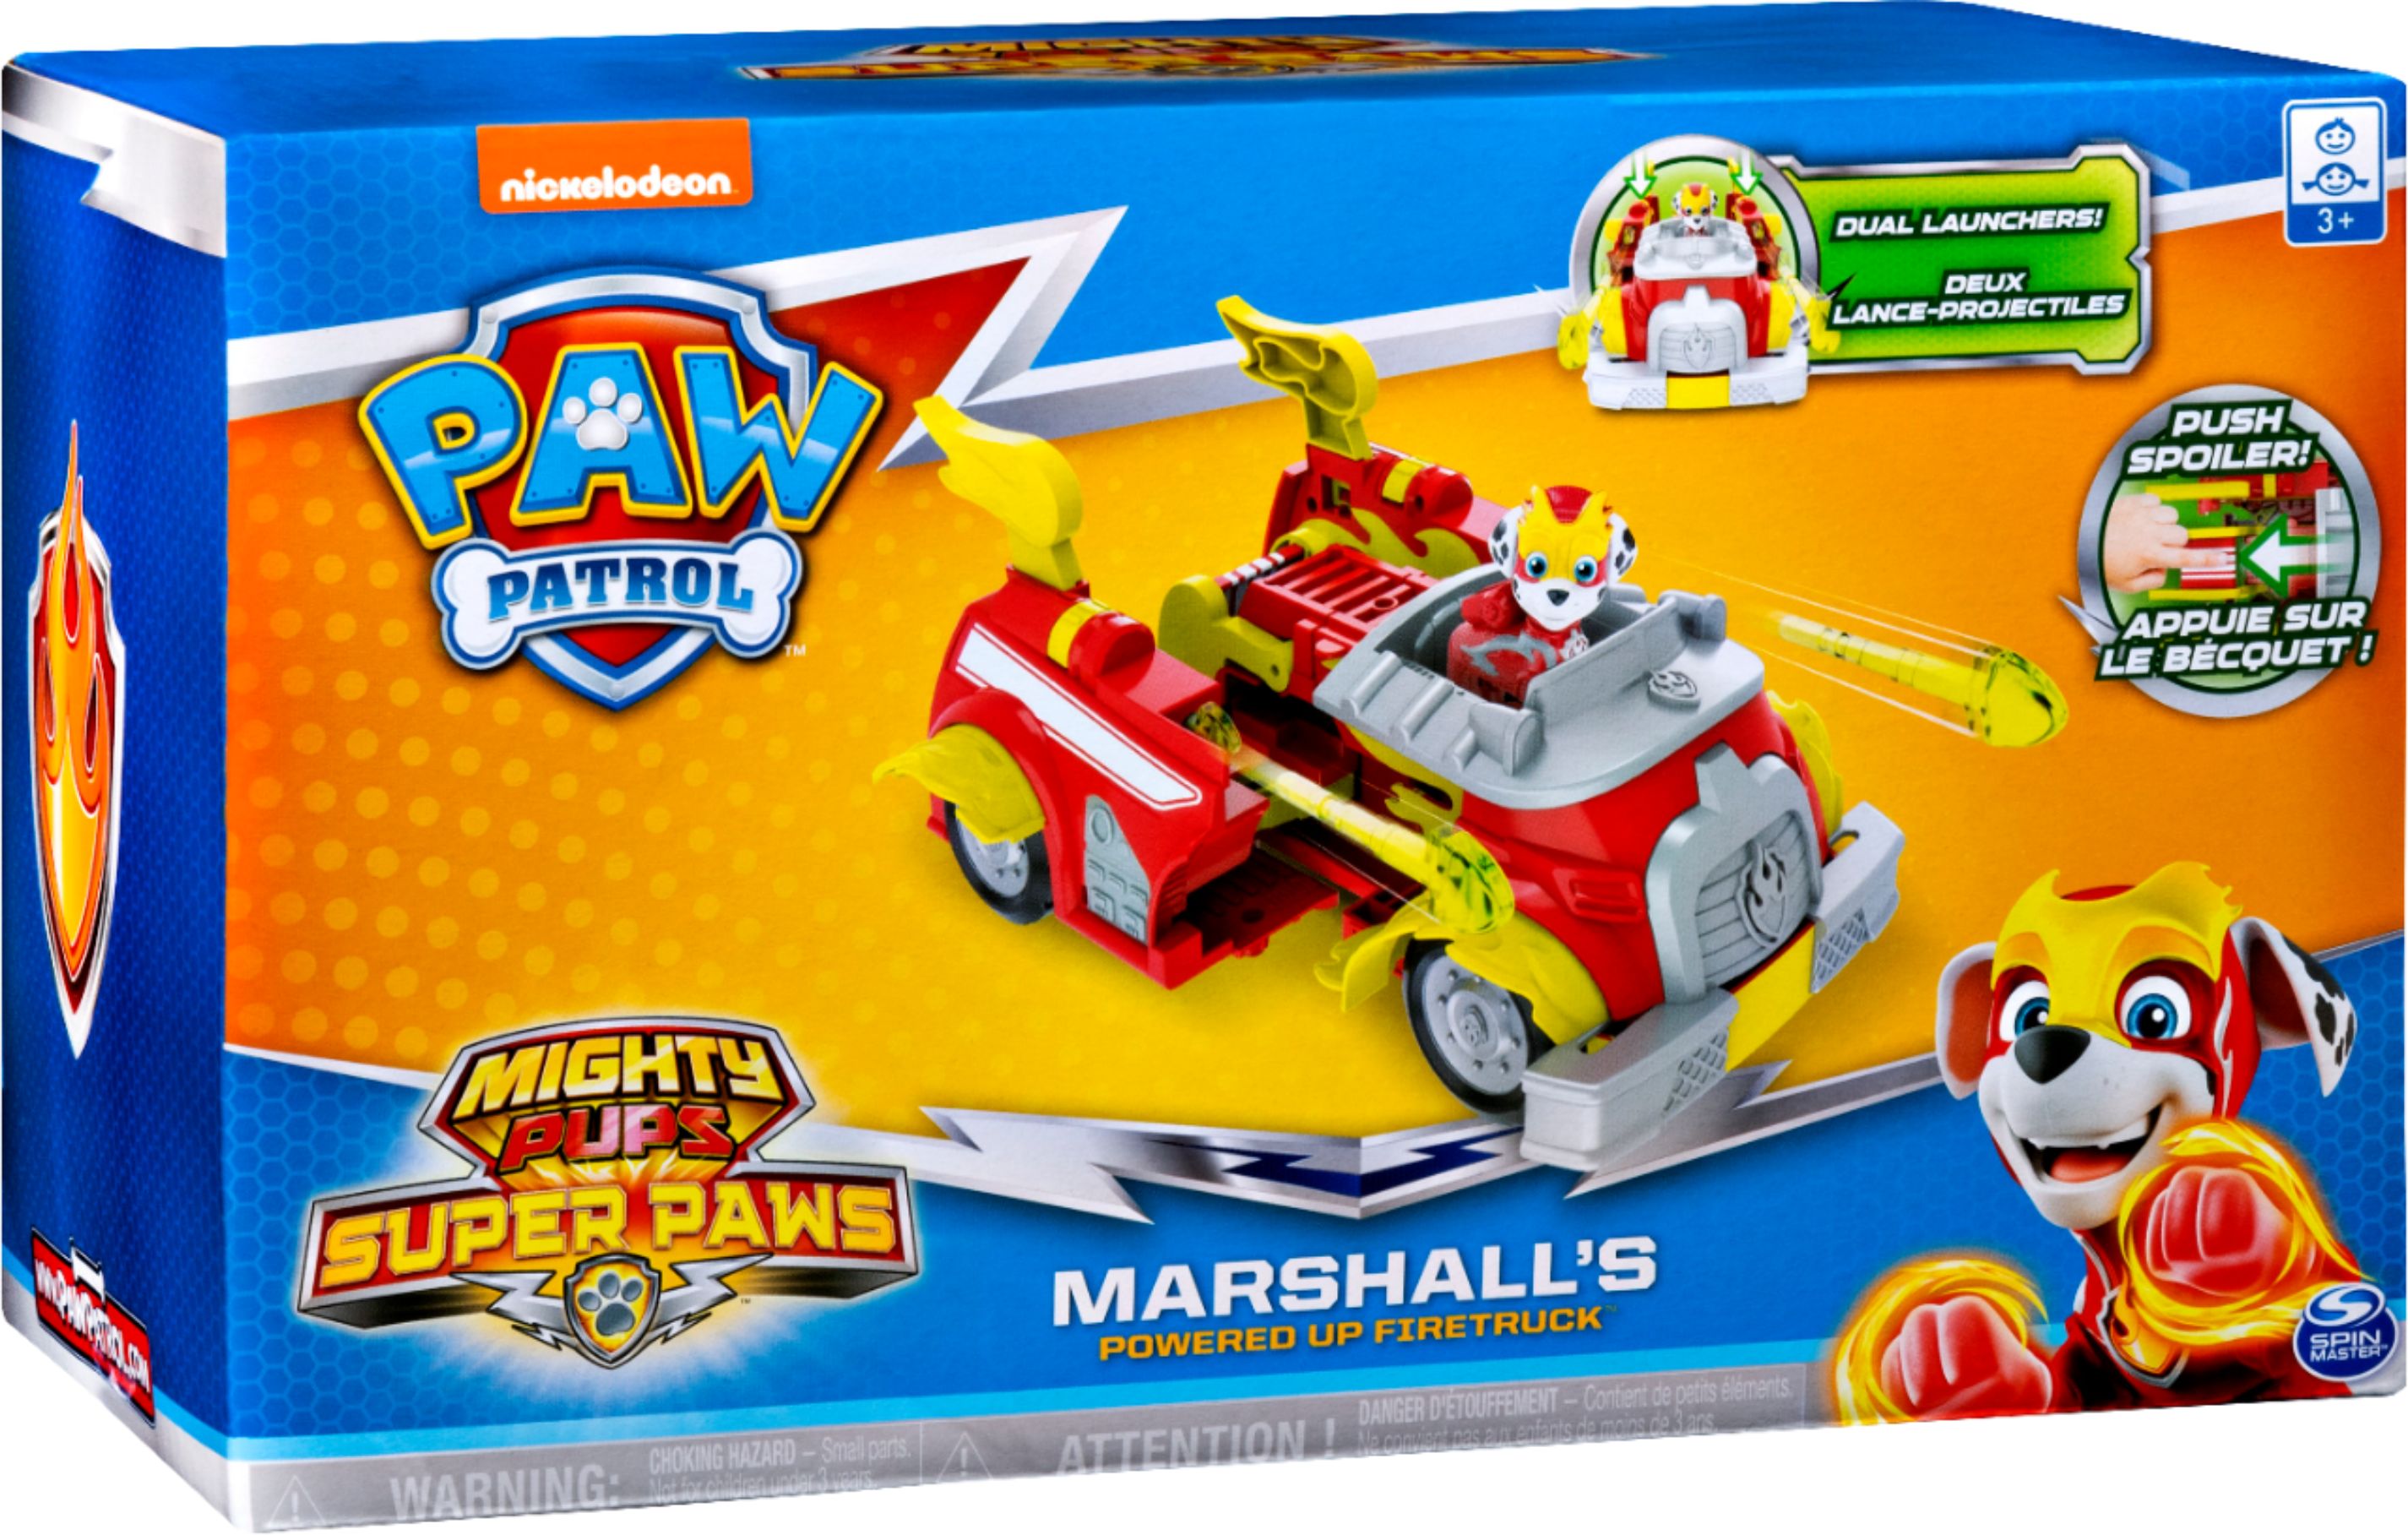 Nickelodeon Paw Patrol Marshalls Powered up Fire Truck Mighty Pups Super Paws for sale online